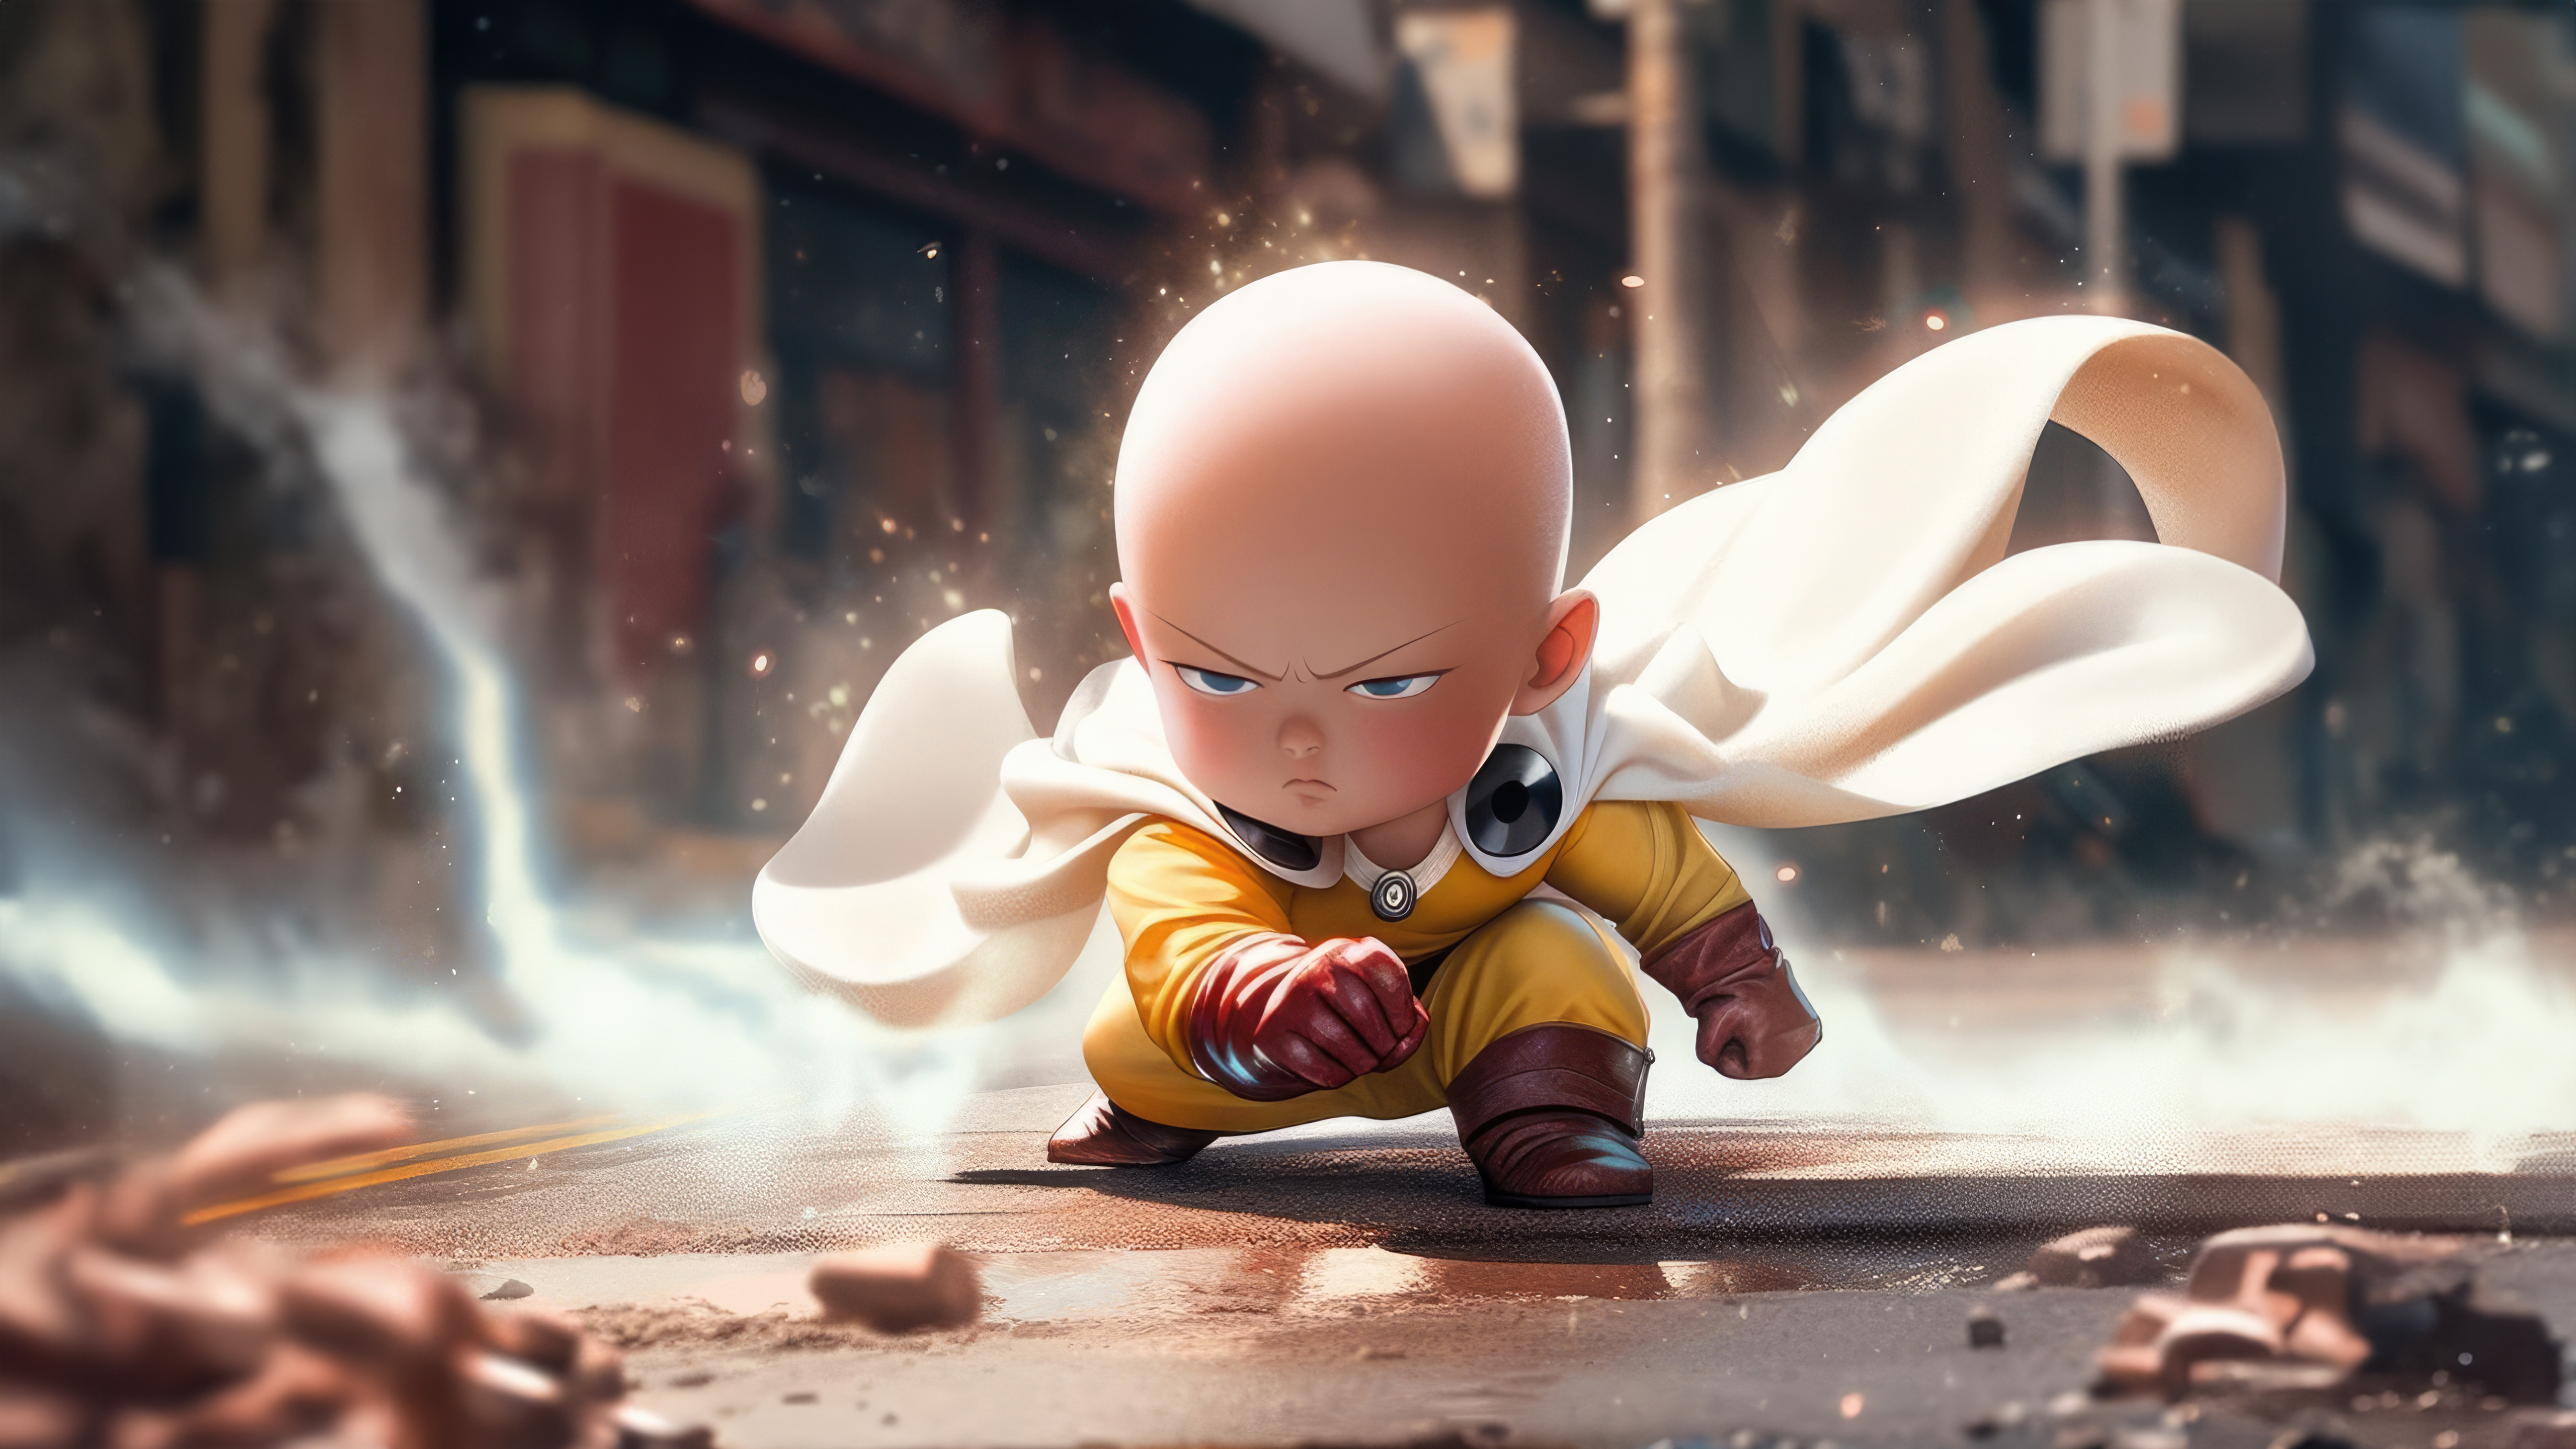 50 Best 'One Punch Man' Quotes from the Anime | Sarah Scoop